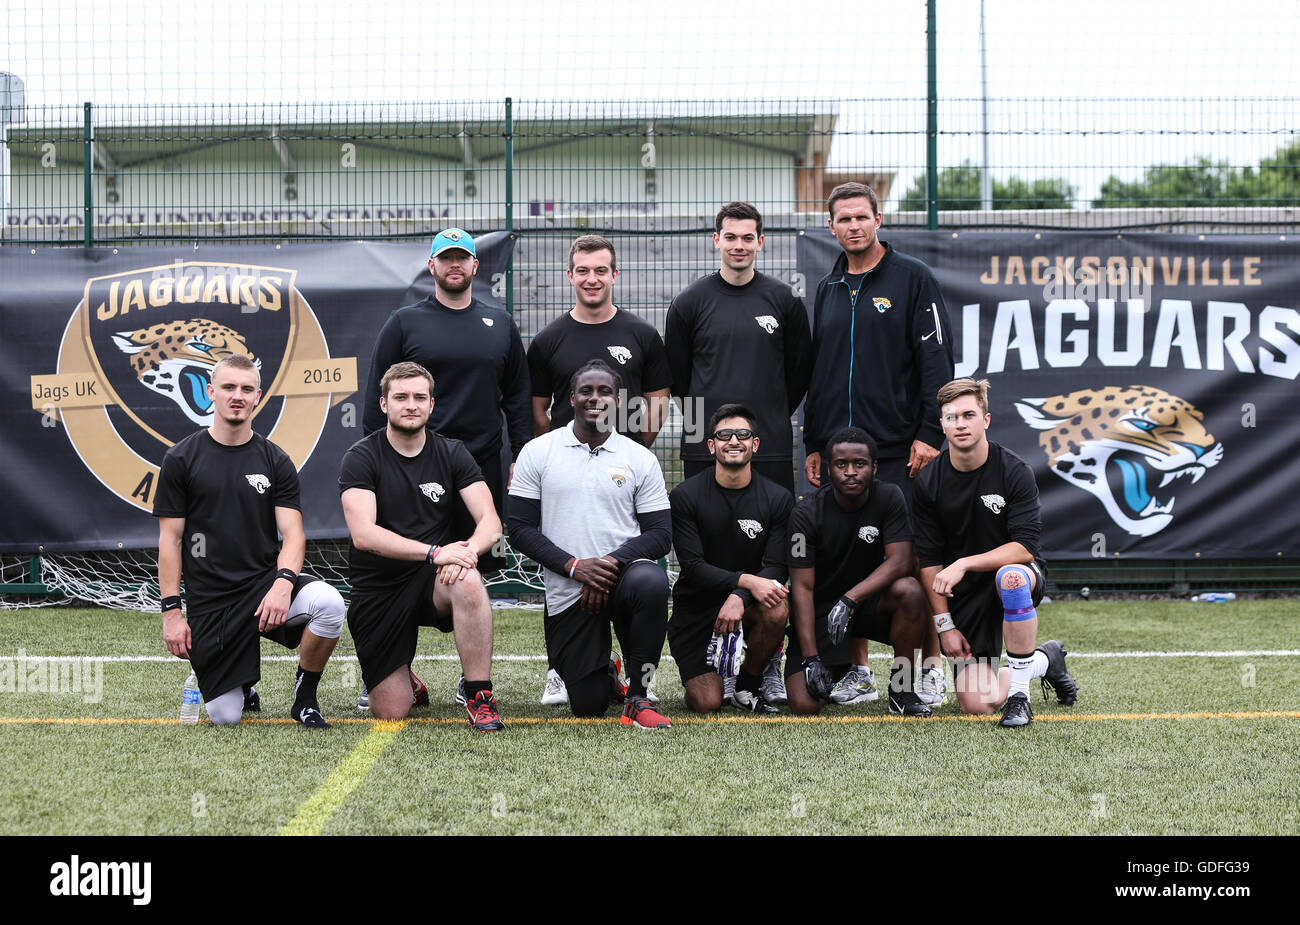 Jacksonville Jaguars assistant defensive line coach Aaron Whitecotton (back row, left), Denard Robinson (front row, centre left) and Tony Boselli (back row, right) pose for a photo with students during the Jacksonville Jaguars academy day at Loughborough University. PRESS ASSOCIATION Photo. Picture date: Friday July 15, 2016. Photo credit should read: Barry Coombs/PA Wire Stock Photo